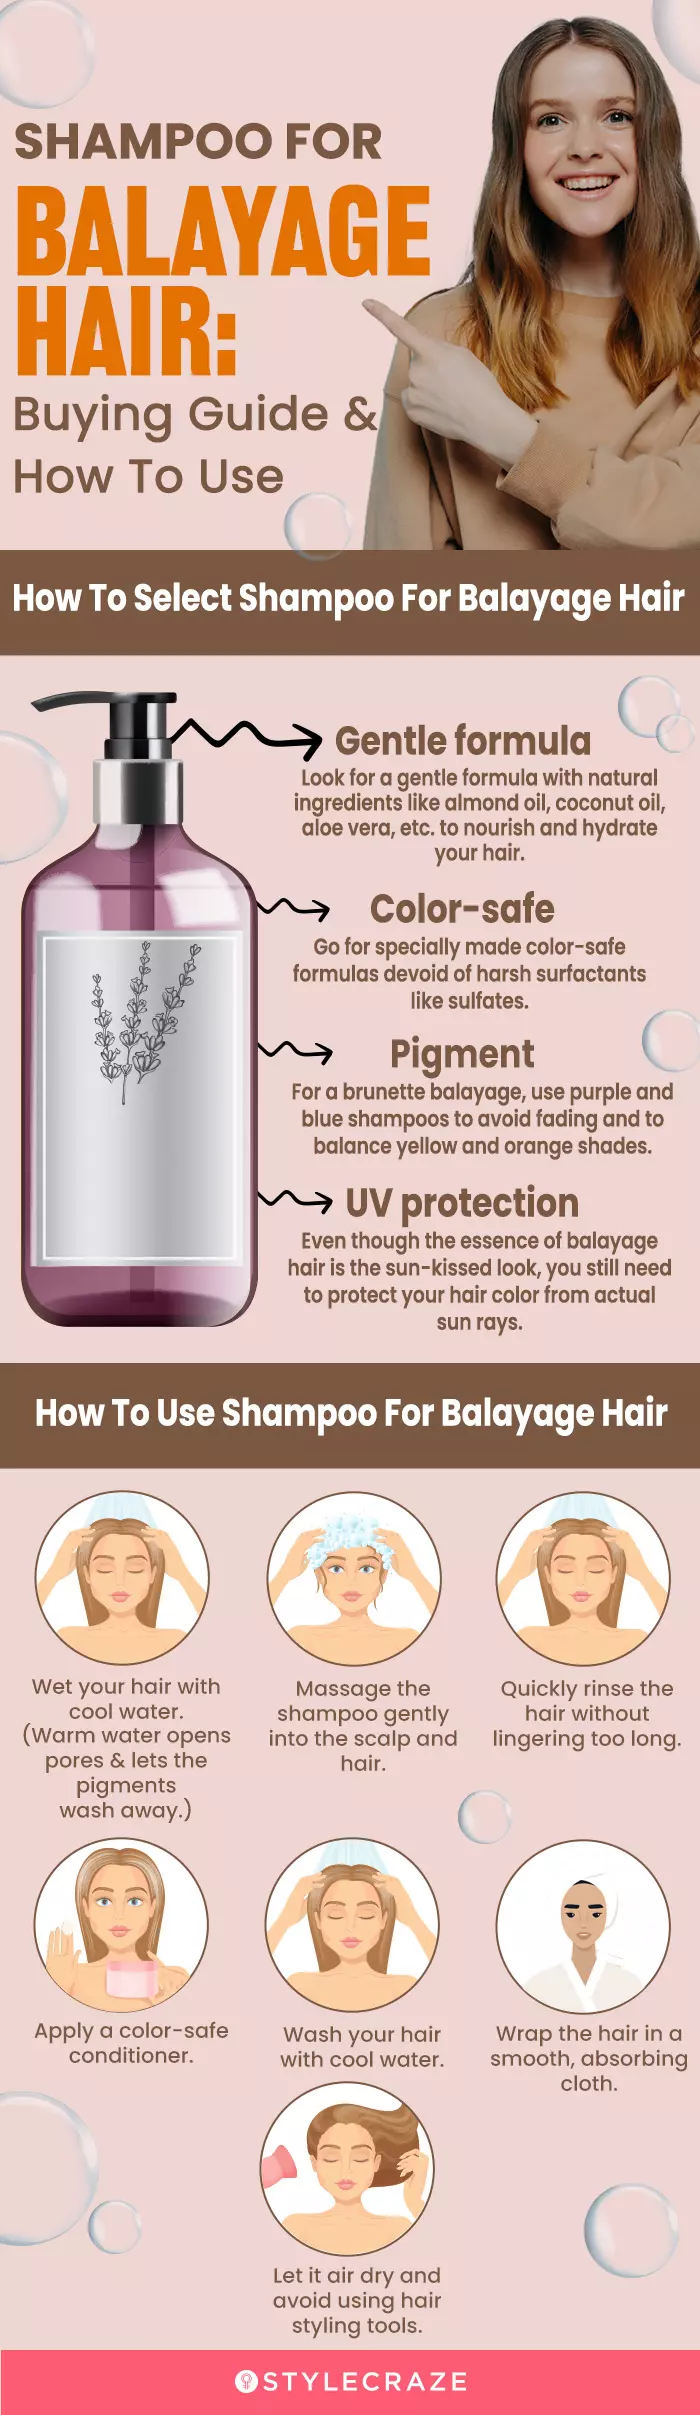 Shampoo For Balayage Hair: Buying Guide And How To Use